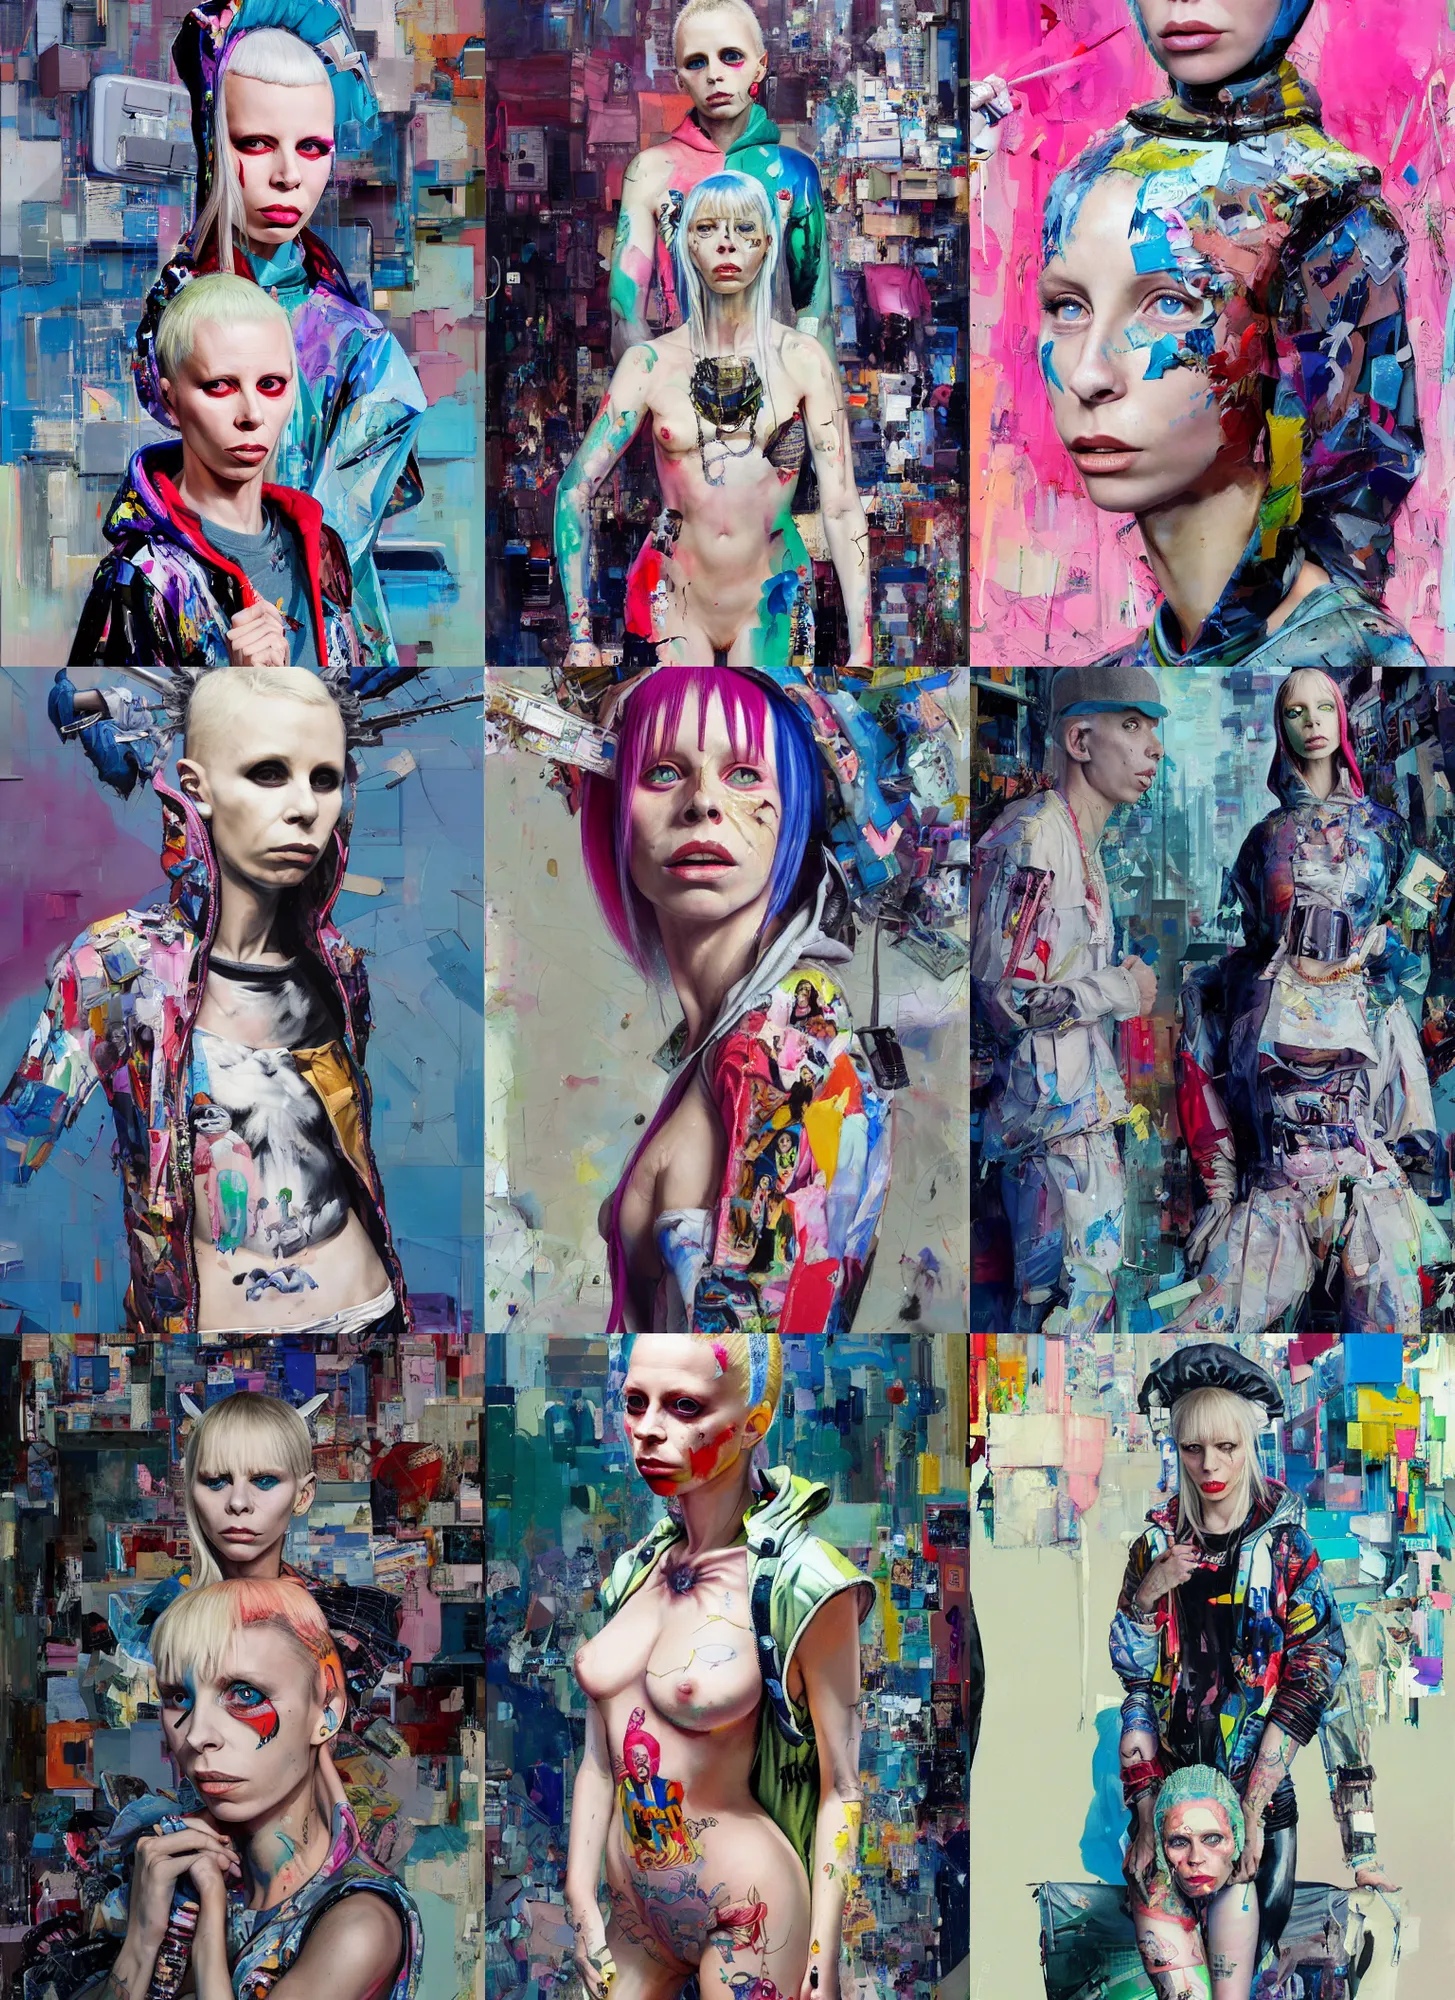 Prompt: music video still of 2 5 year old yolandi visser in style of martine johanna and donato giancola, wearing hoodie, standing in township street, street fashion outfit,!! haute couture!!, full figure painting by john berkey, david choe, ismail inceoglu, detailed impasto, 2 4 mm